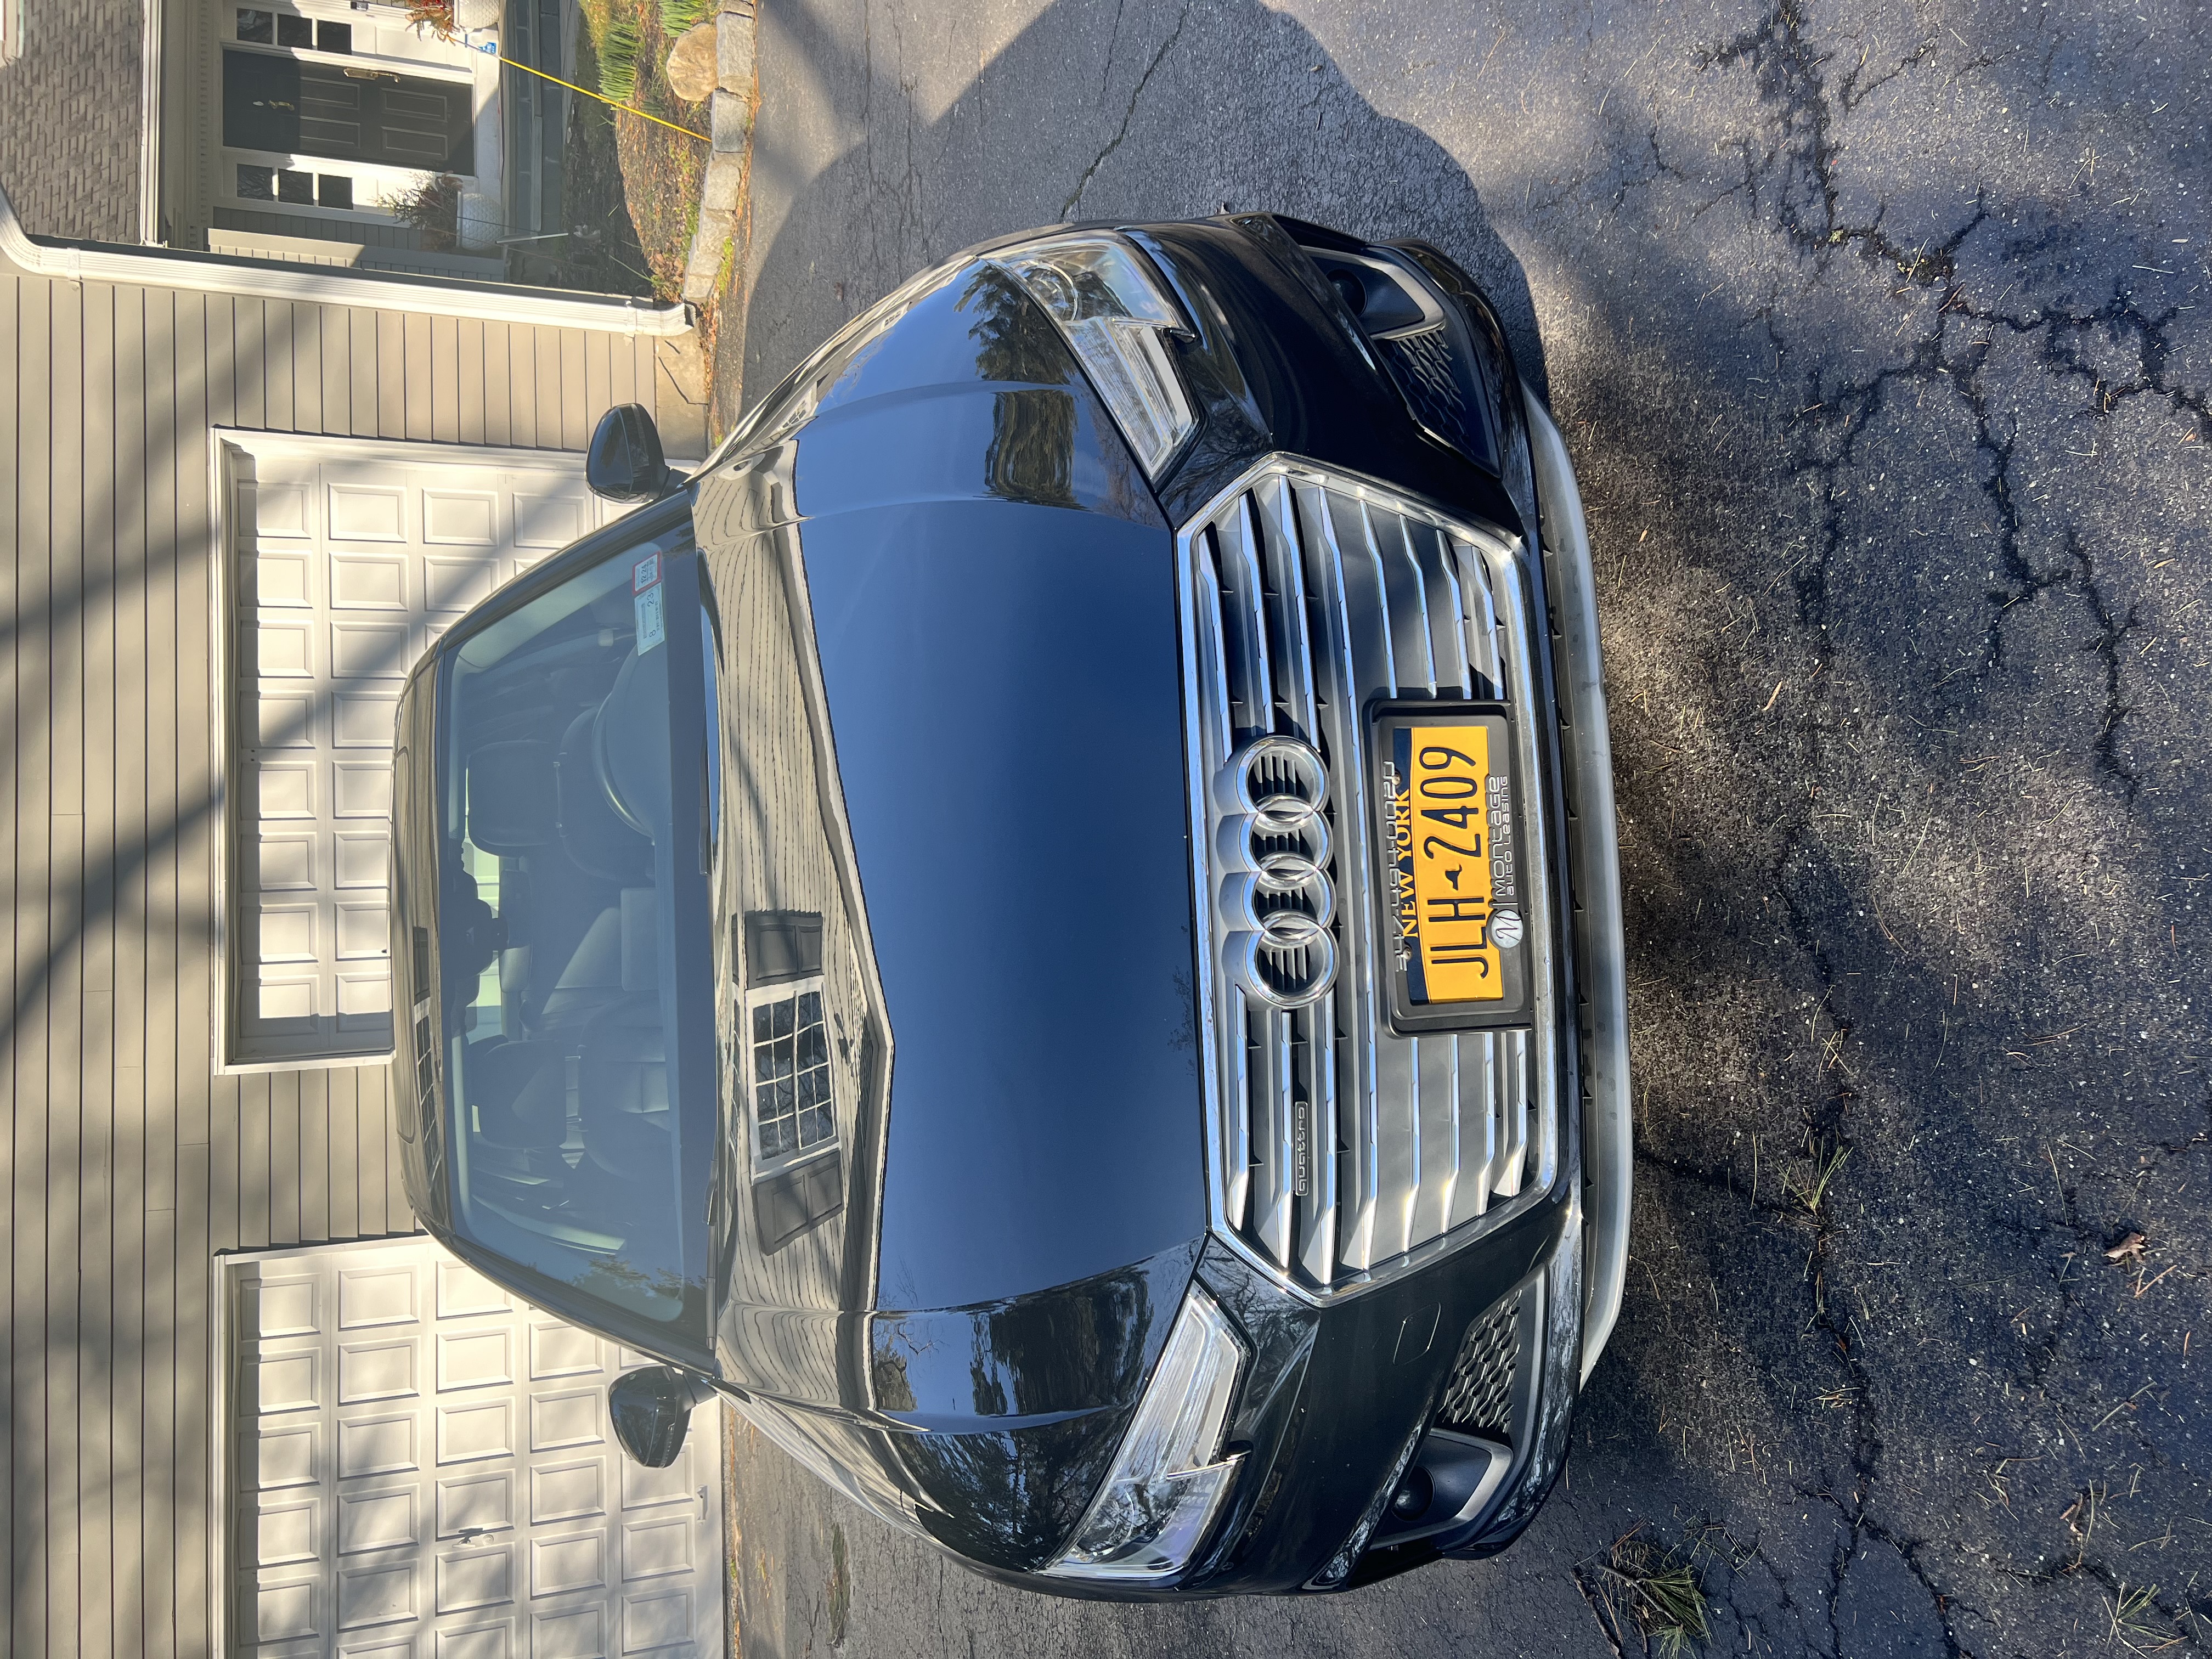 Used Audi A4 for Sale Right Now - Autotrader